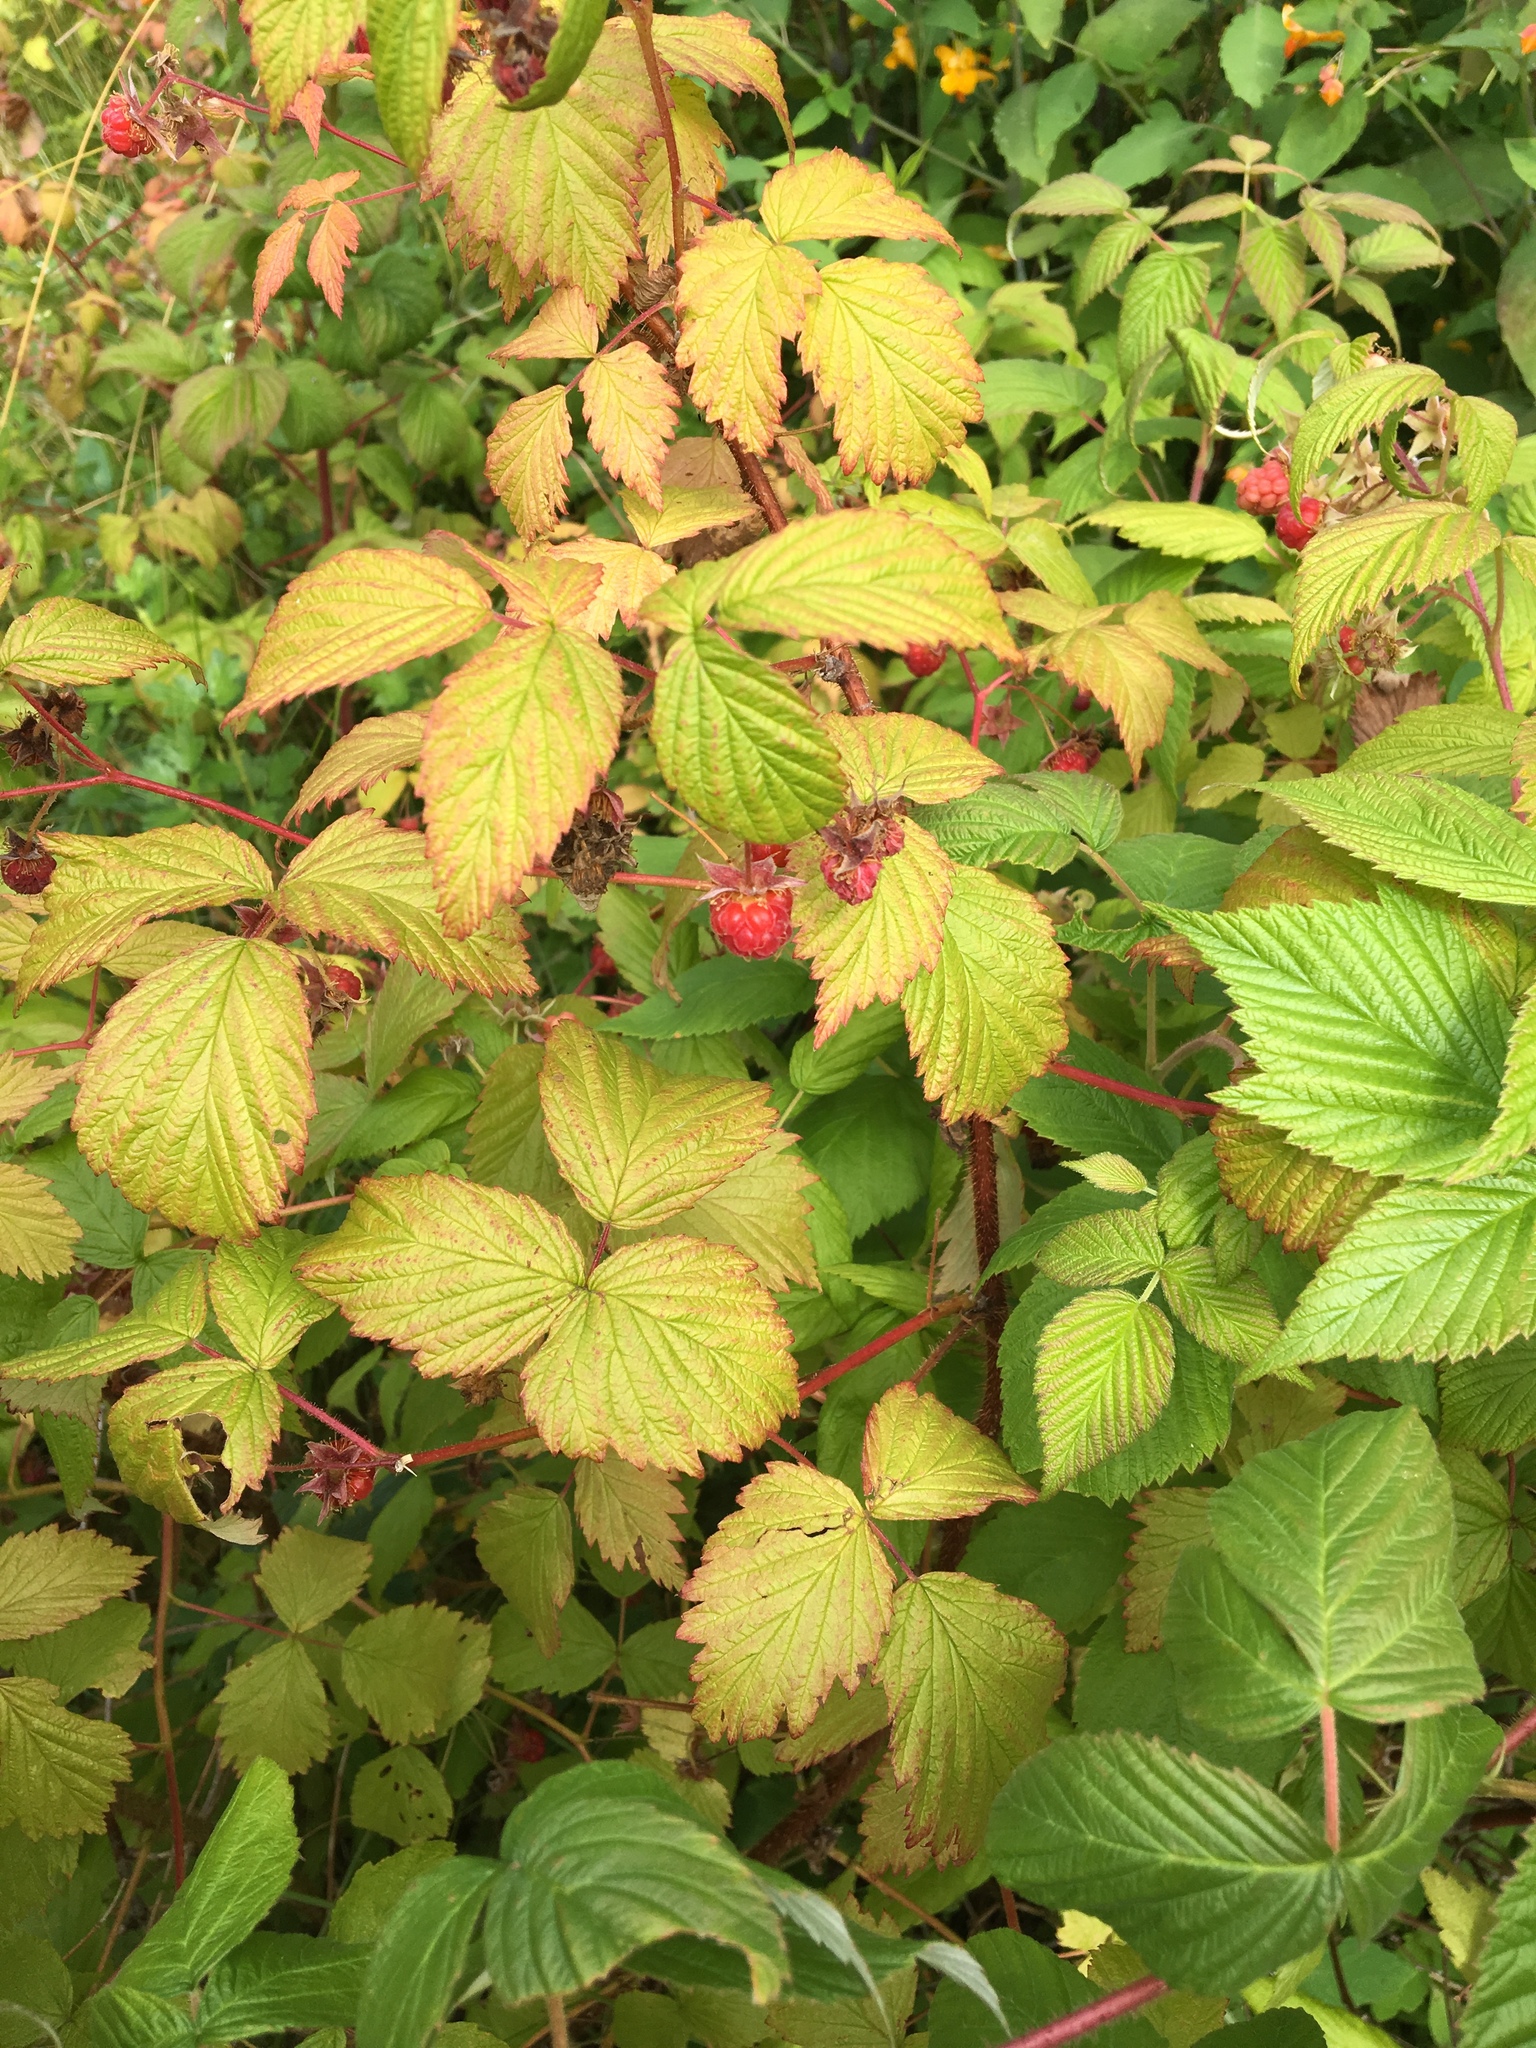 Taken in August, this photo of a raspberry plant has red berries and yellowing leaves.